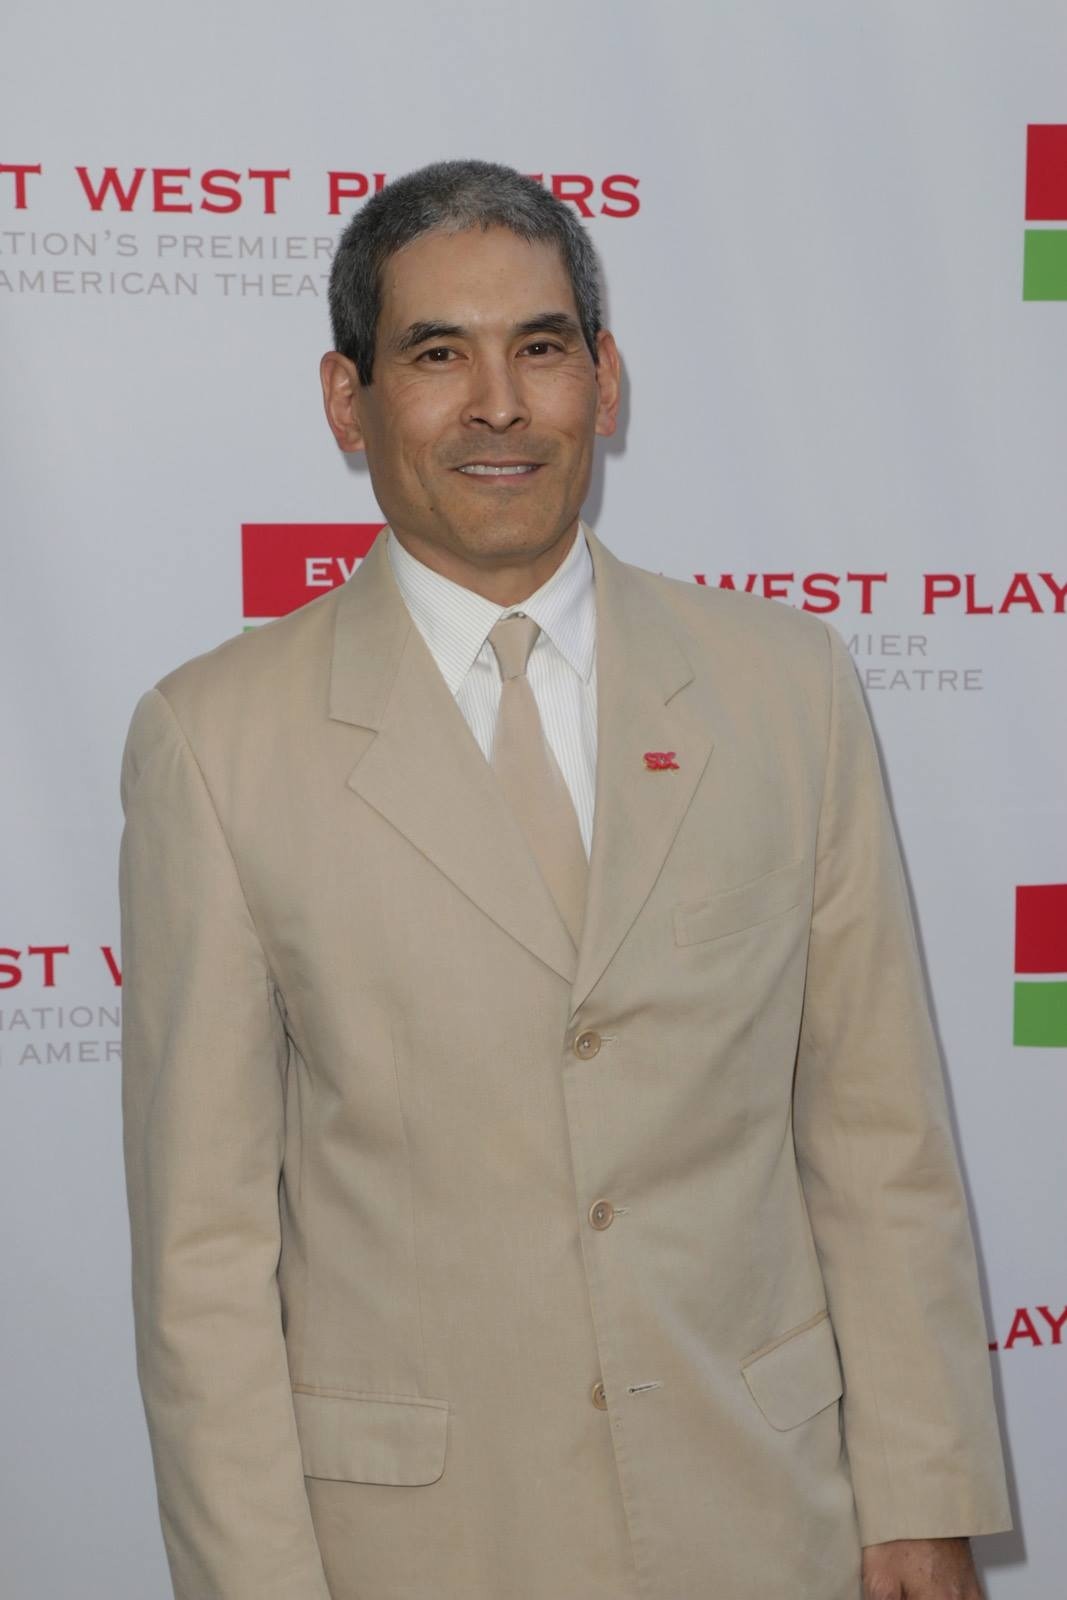 East West Players 48th Anniversary Visionary Awards Gala - April 28, 2014; Universal Hilton